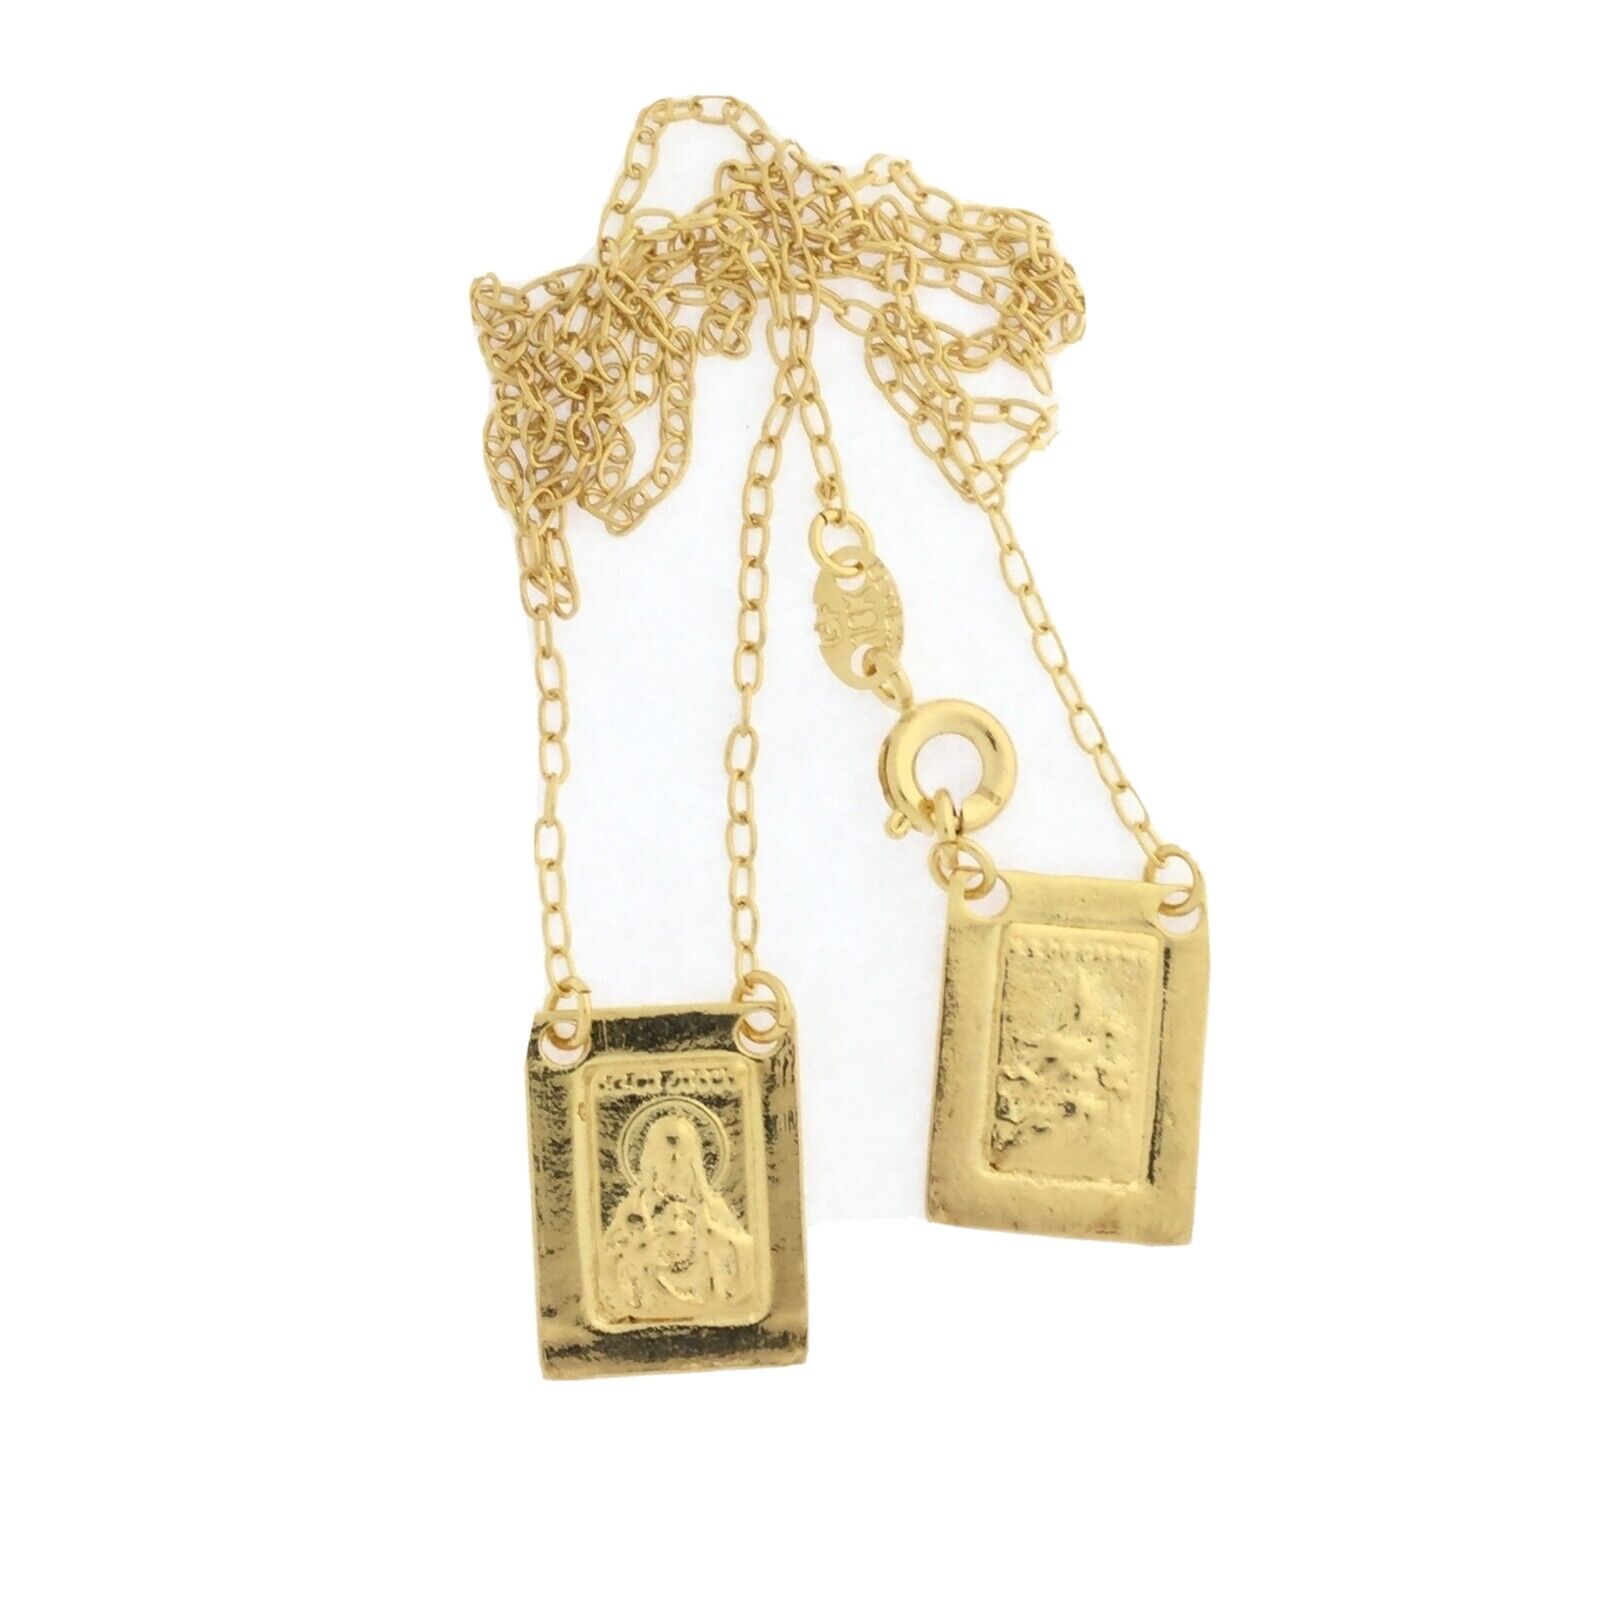 Gold Plated Engraved Square Scapular Medals Necklace  Virgen Mary Heart of Jesus